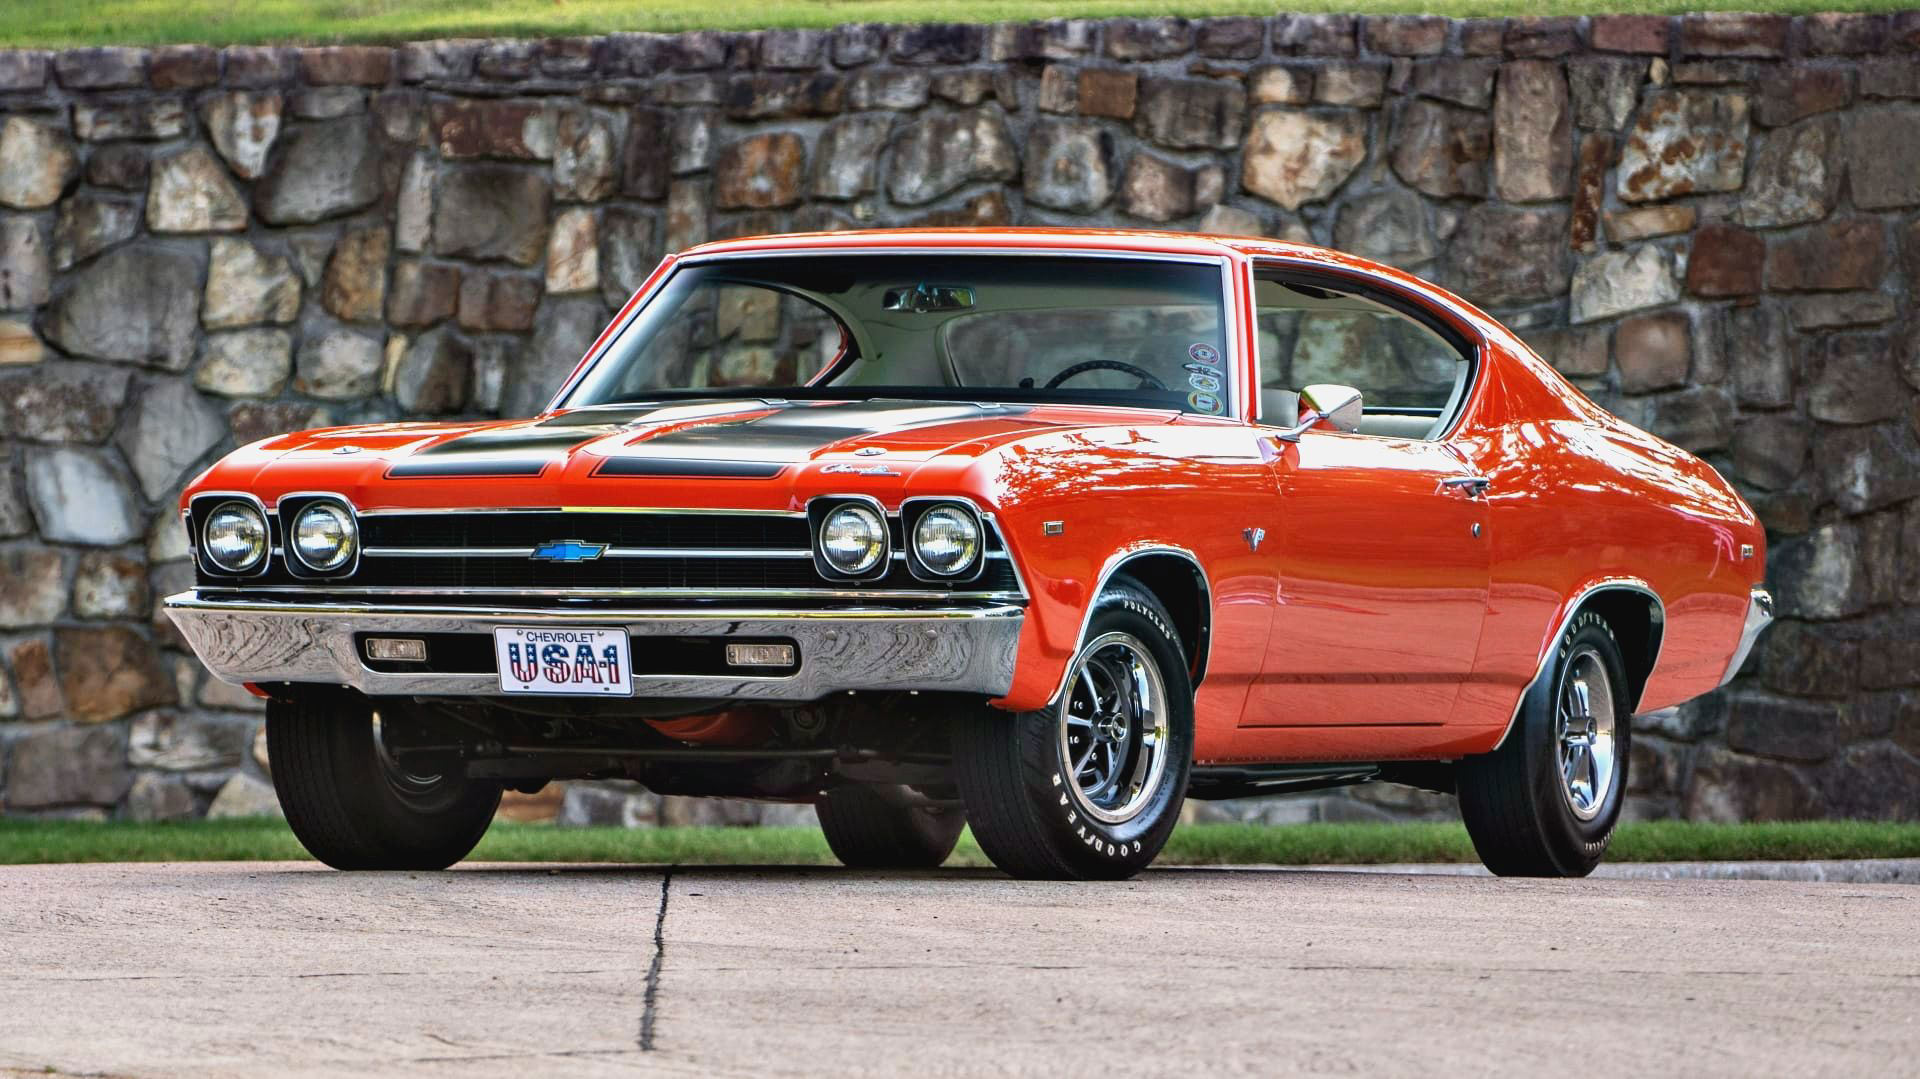 1969 Chevy Chevelle Engine Options And Power Compared